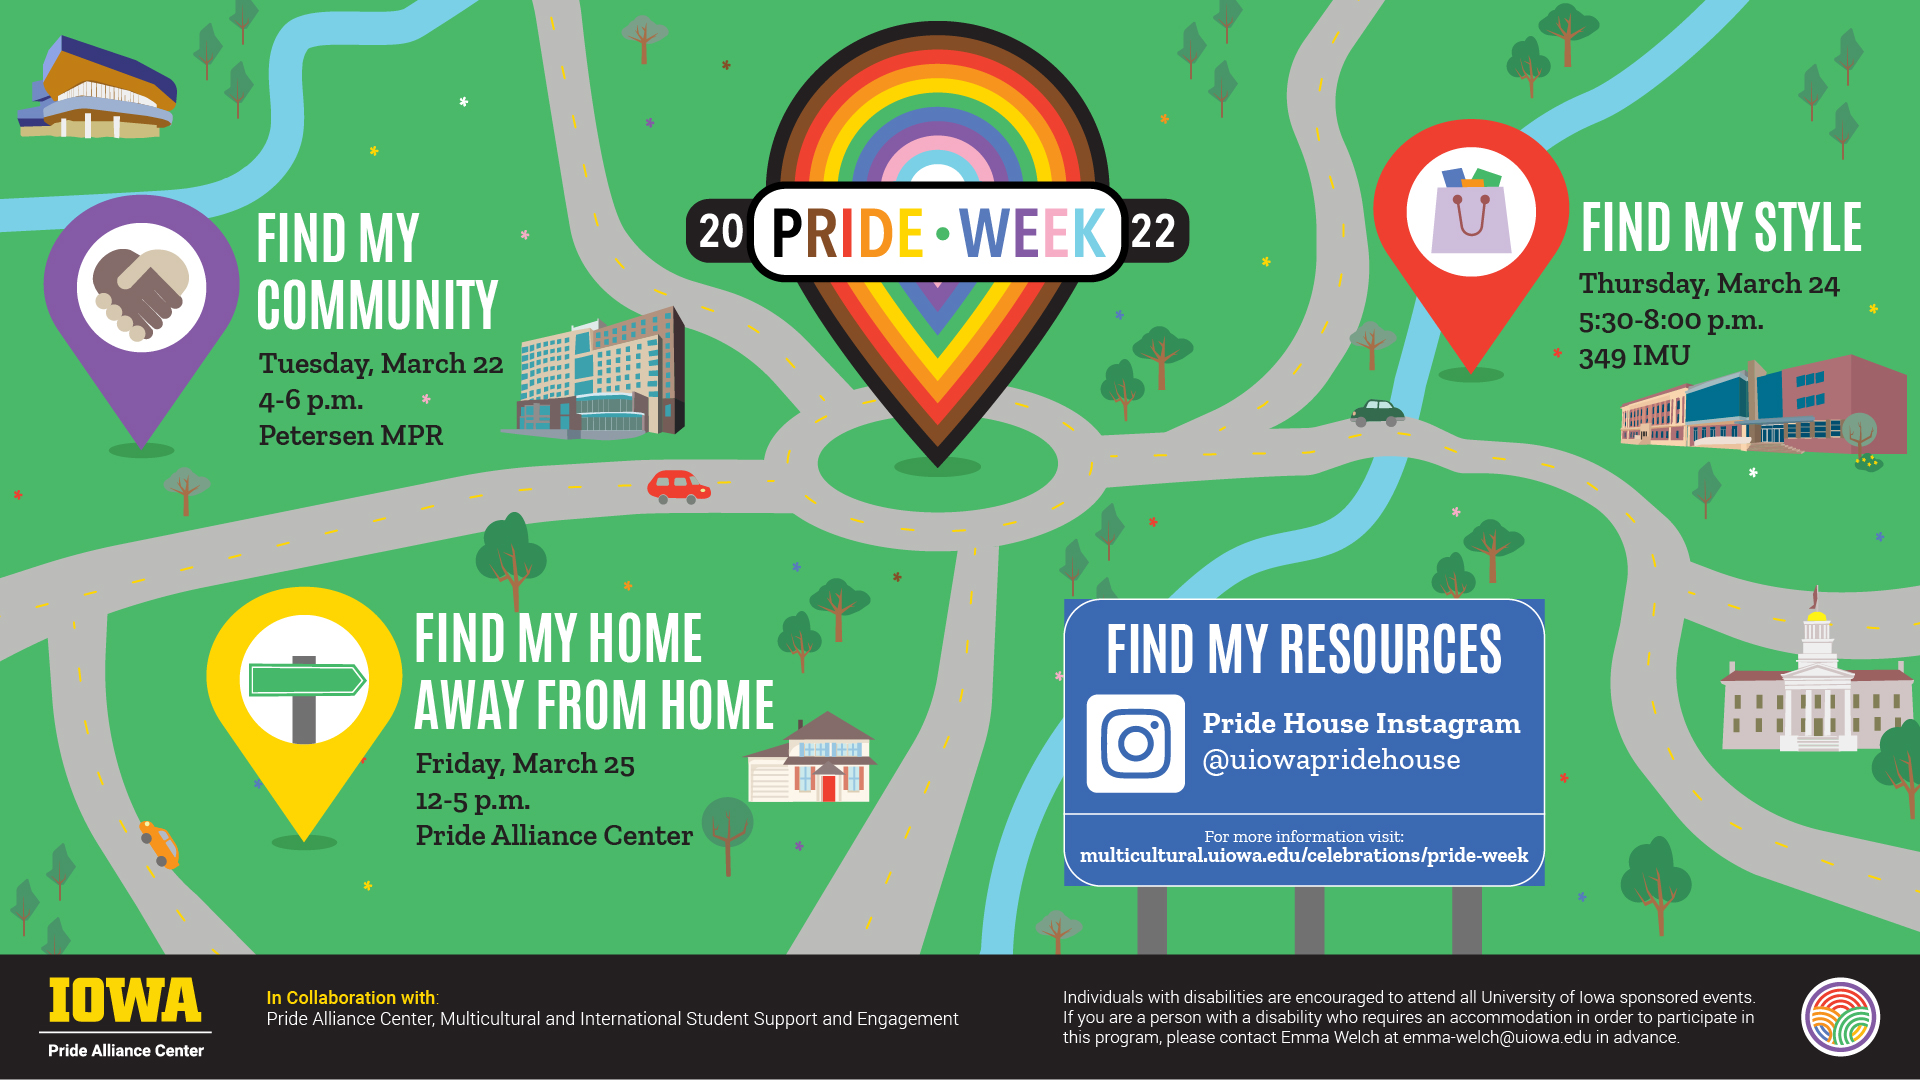 Cartoon map loosely based on the UI campus. Along the map, event details are listed next to teardrop location markers and a cartoon version of the building they will be held in. The inclusive rainbow Pride Week logo is formulated into a teardrop location marker in the middle of the map. All event details can be found and read by screen readers at https://multicultural.uiowa.edu/celebrations/pride-week.